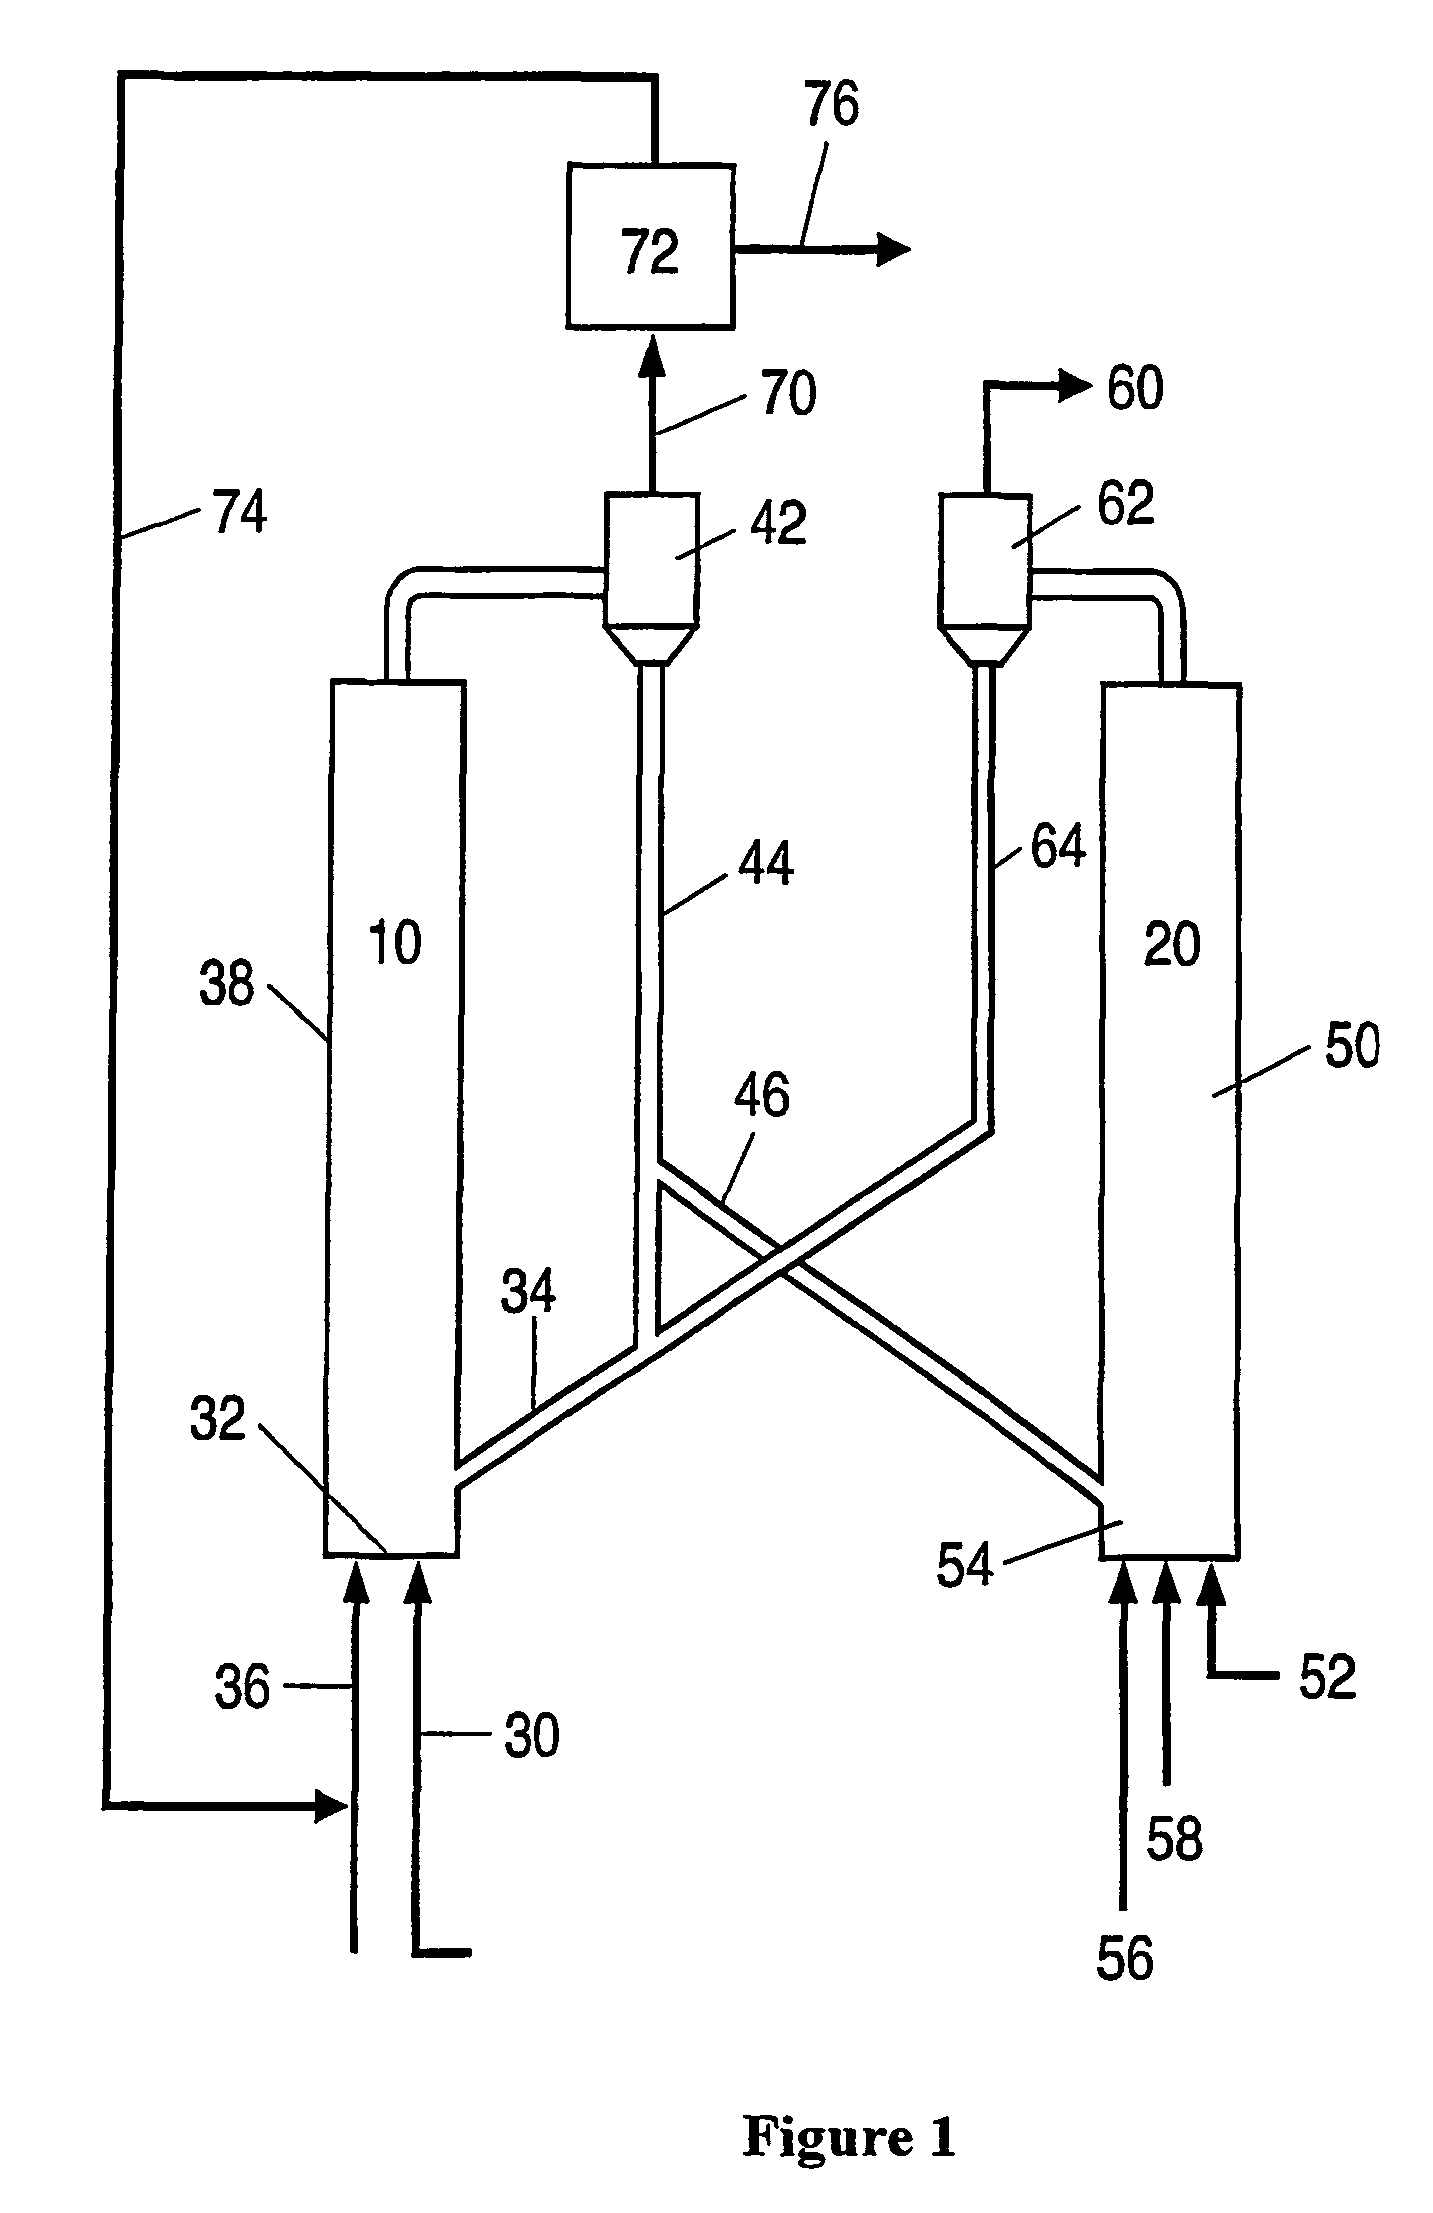 Process for desulfurizing hydrocarbon fuels and fuel components